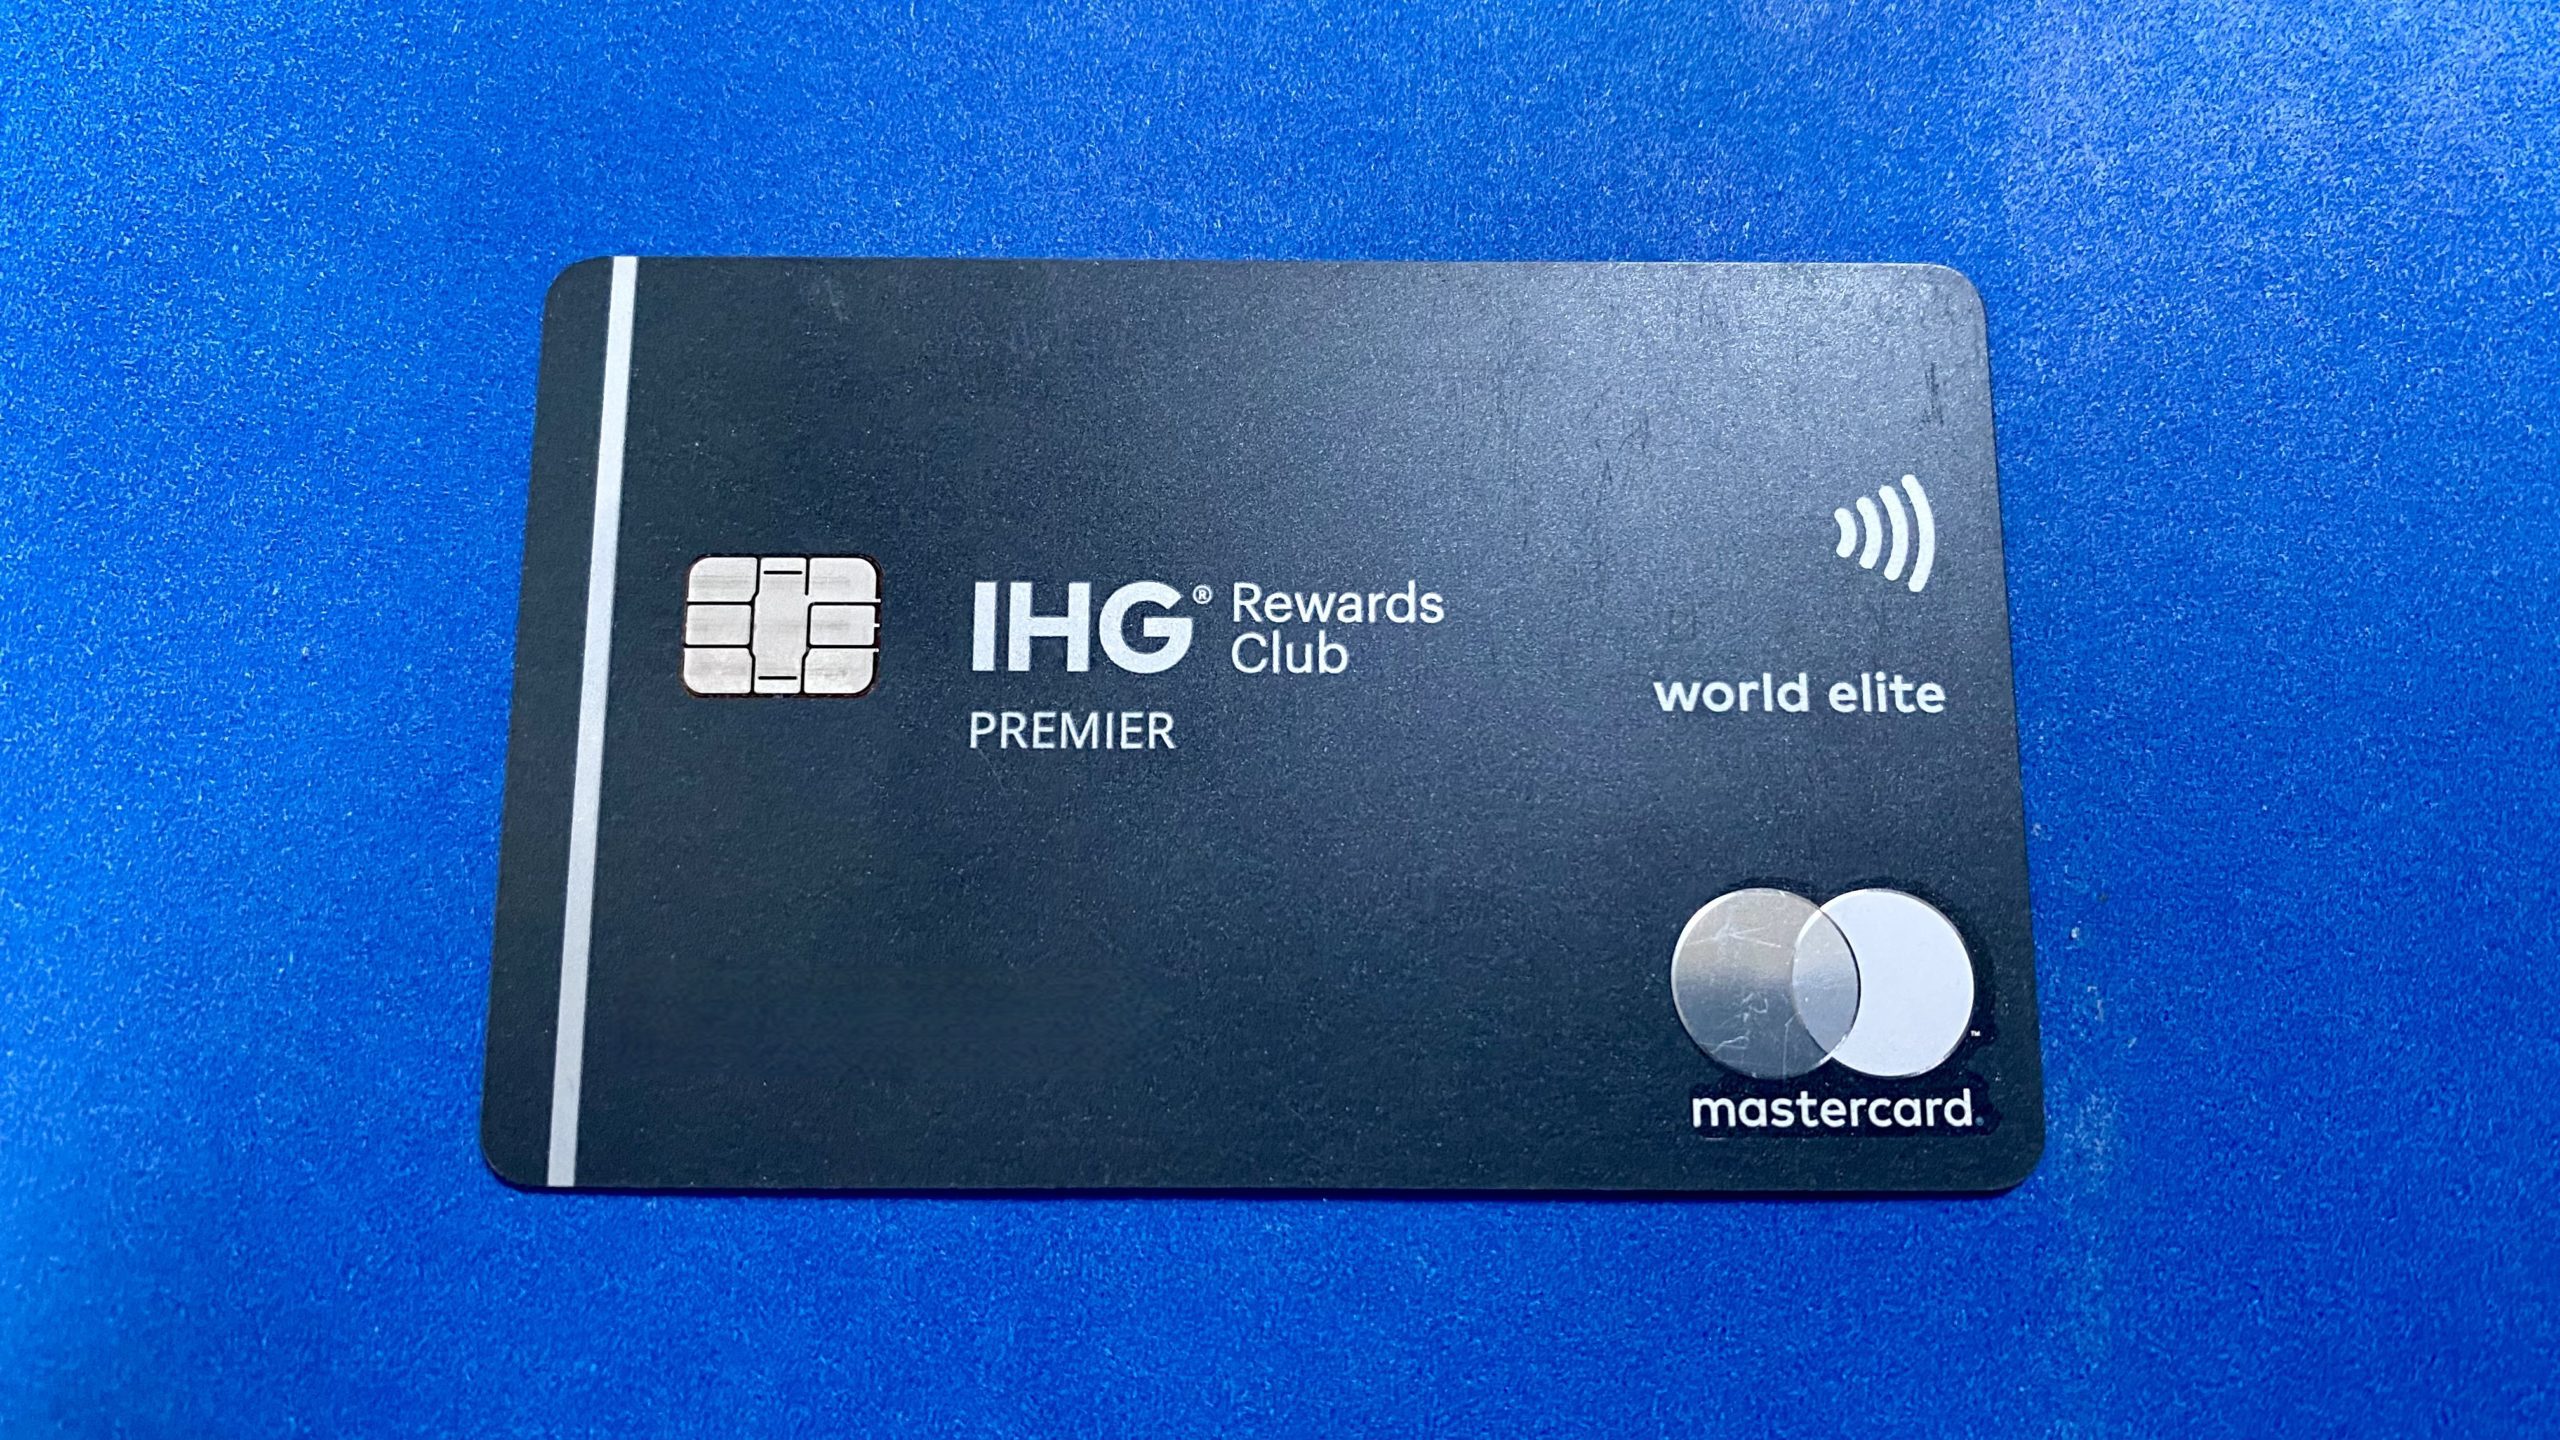 a black credit card with white text and silver circles